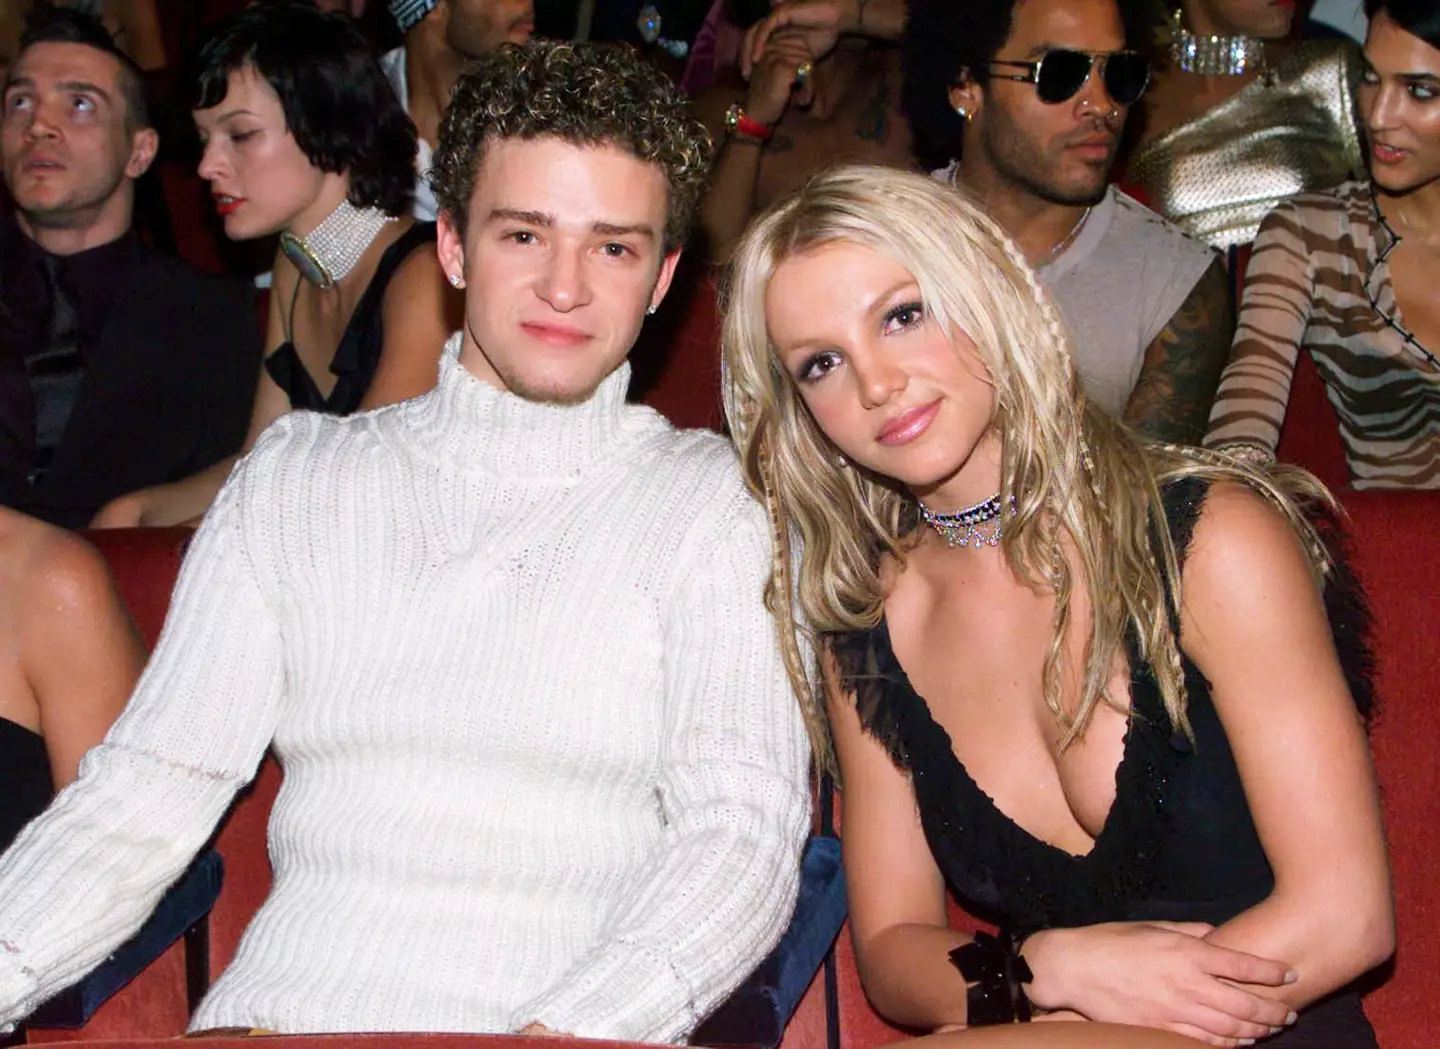 After the release of Britney's memoir Timberlake turned off the Instagram comments on his page.